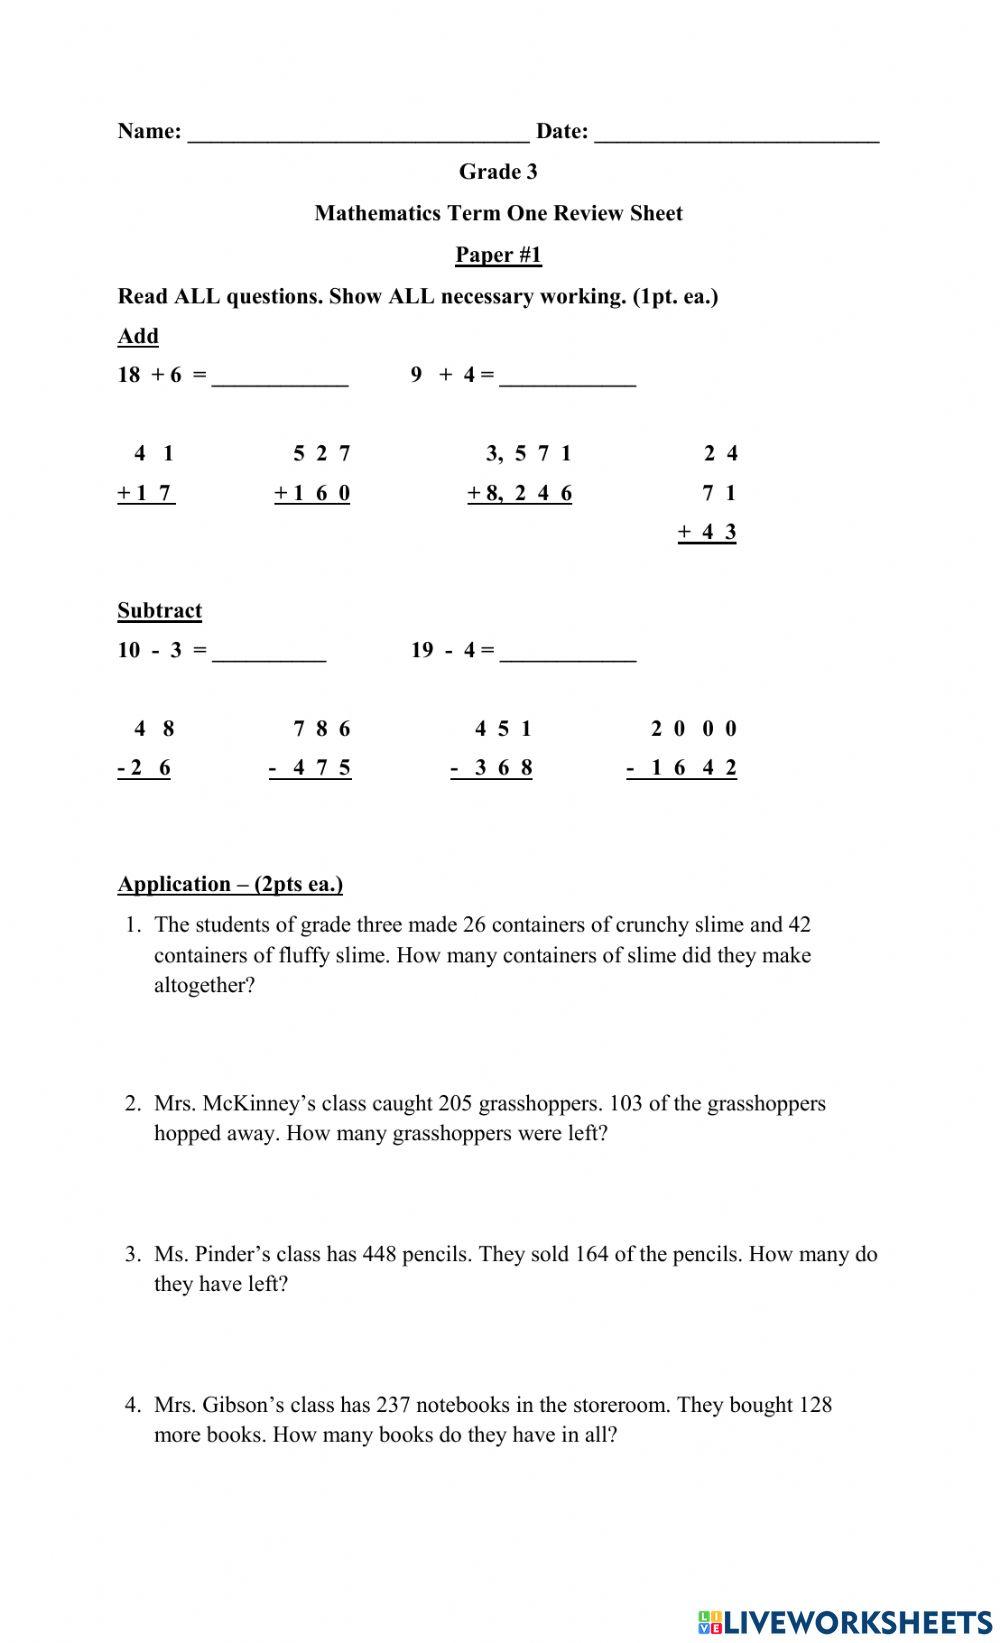 Math Review Paper -1